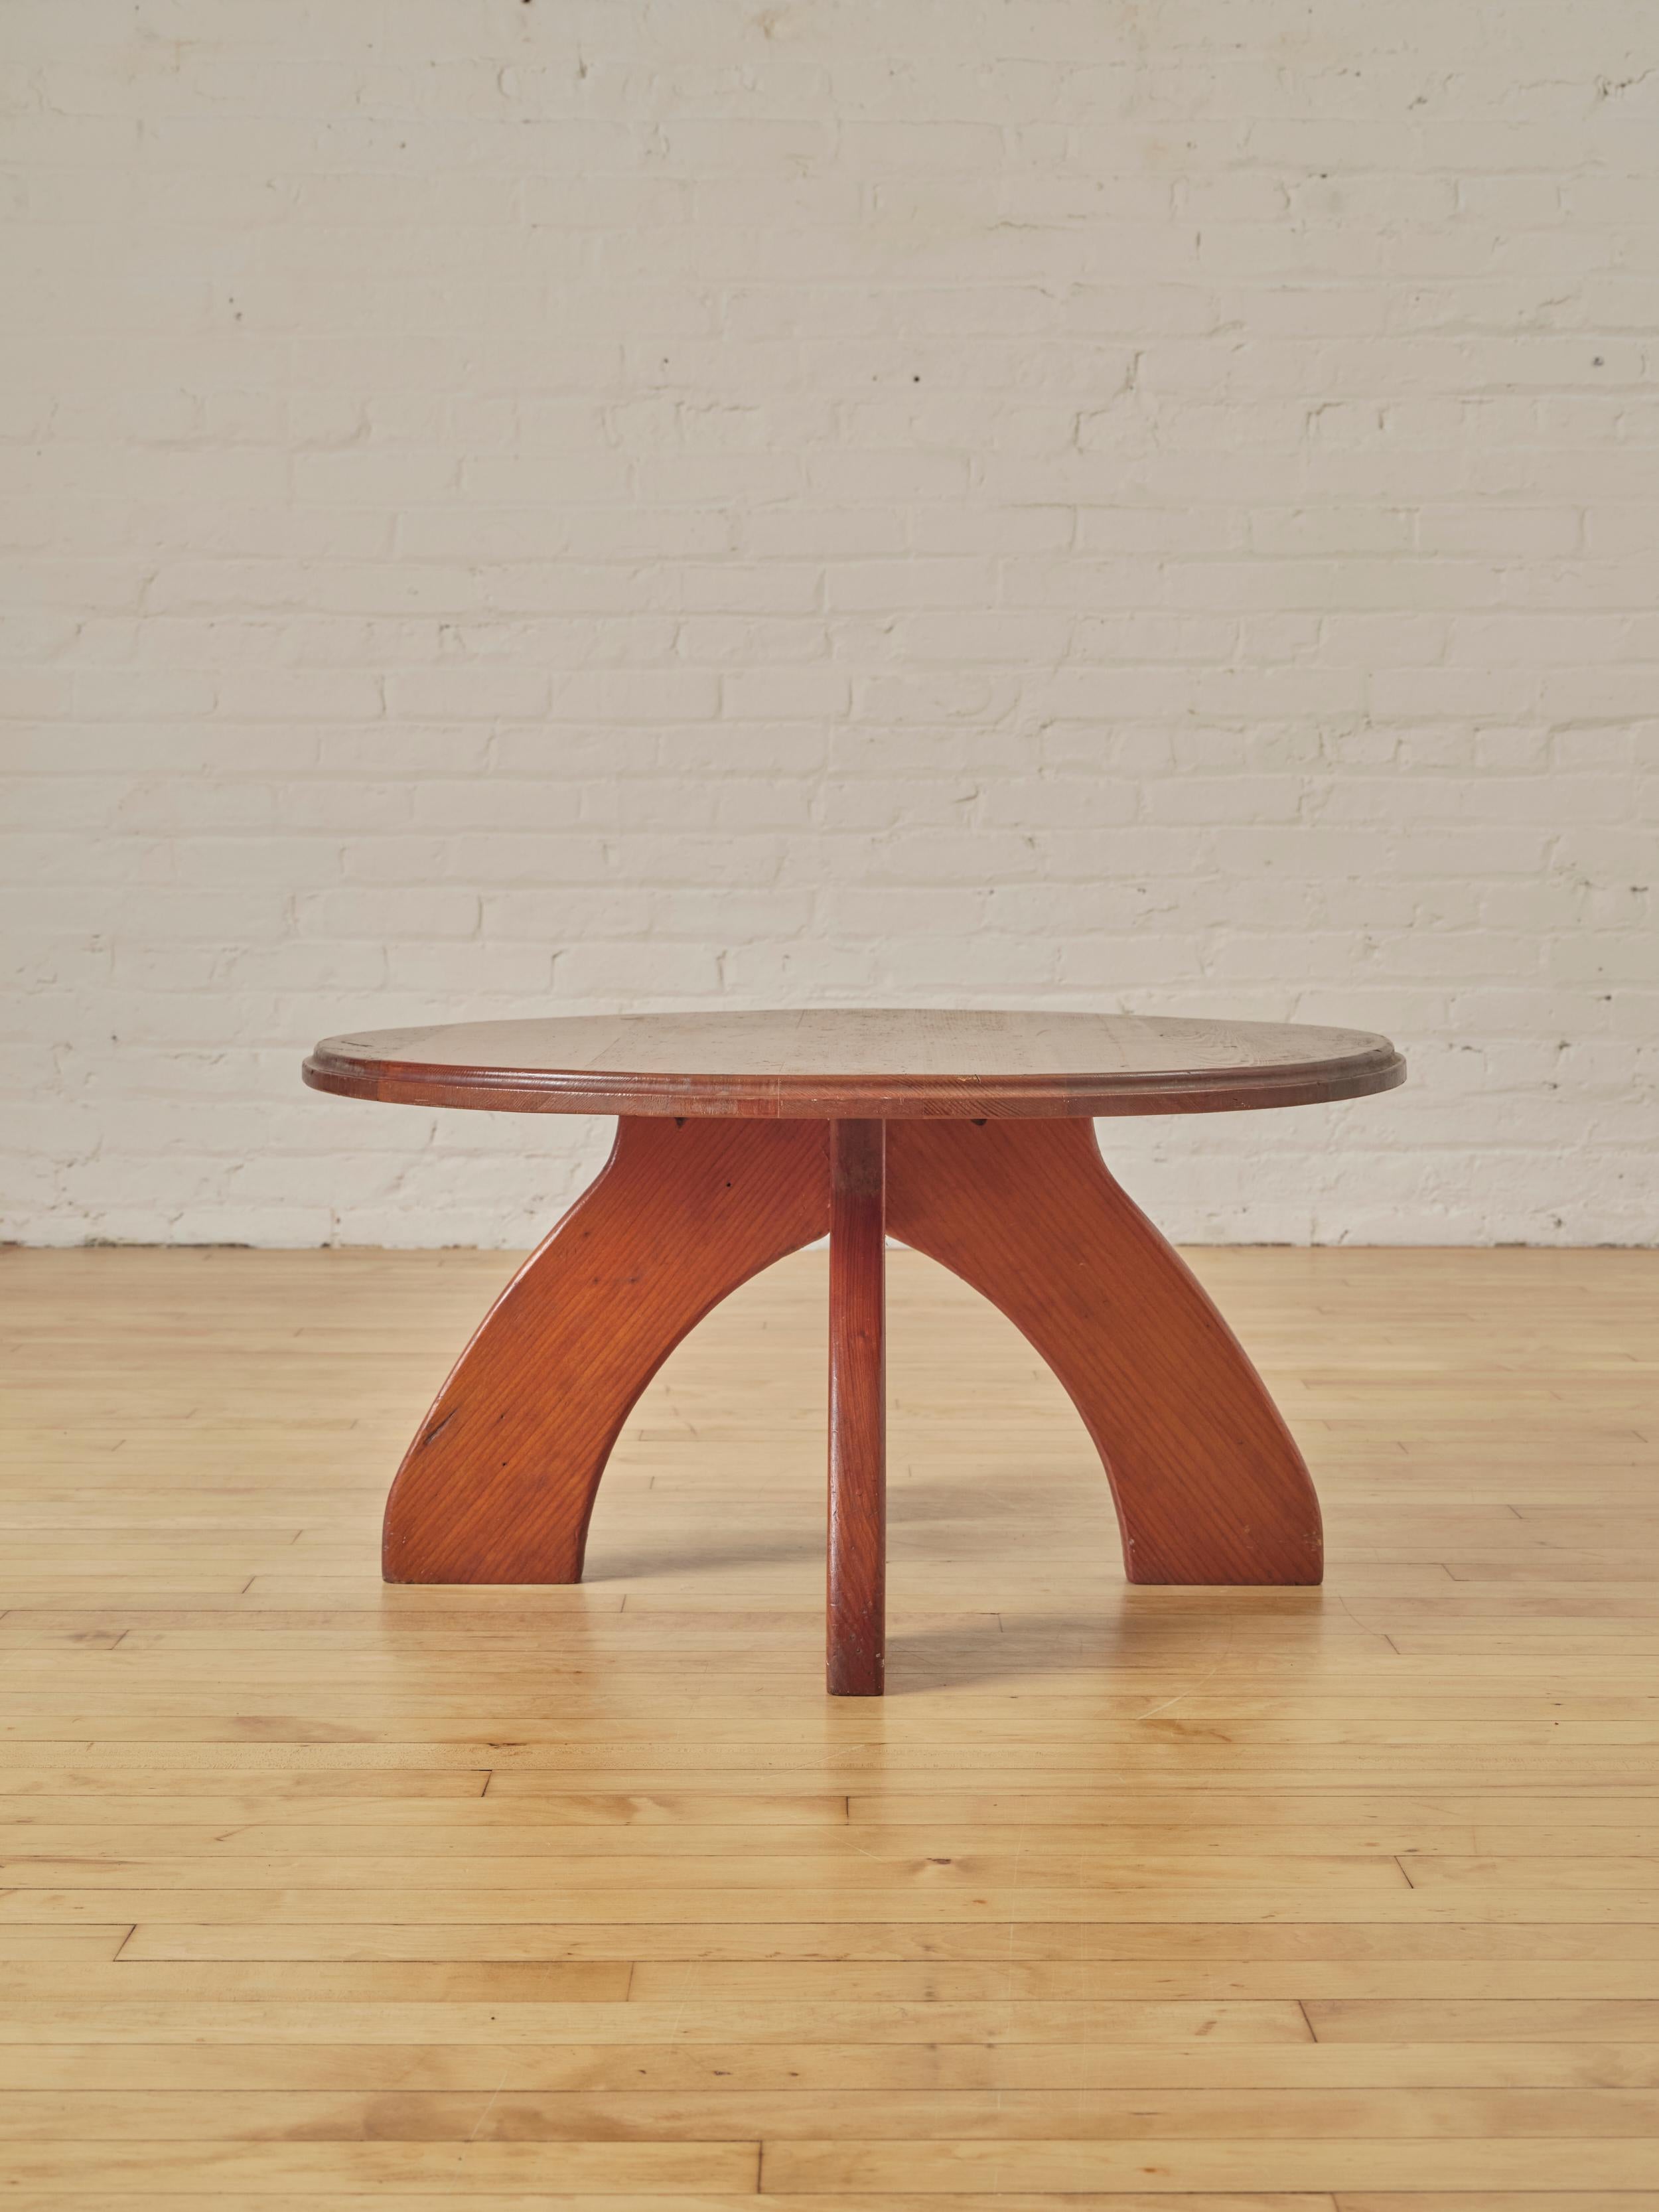 Modernist Pine Coffee Table with support from uniquely shaped irregular legs.

